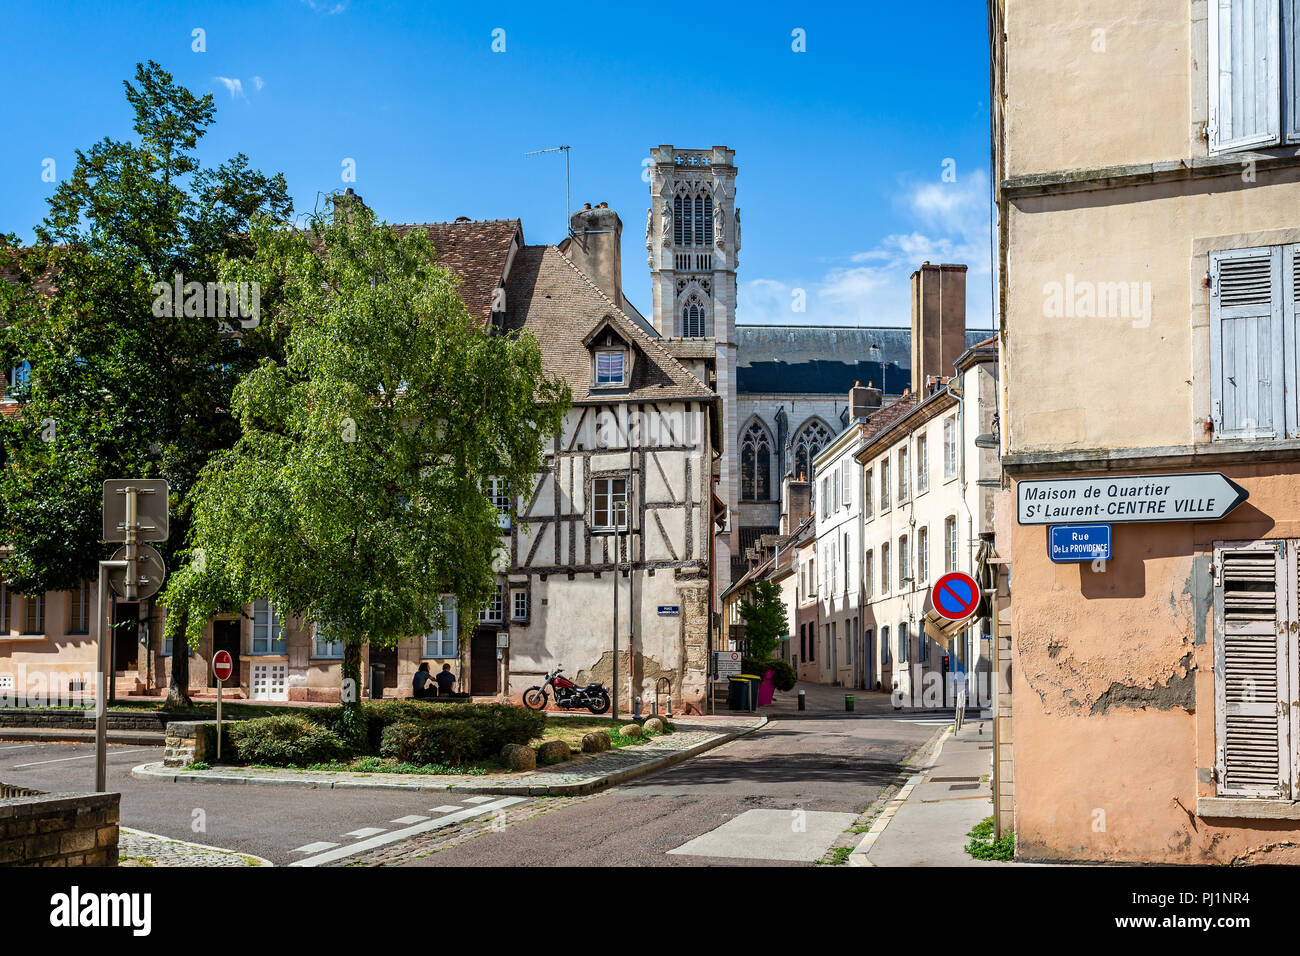 Side view of St Vincent Cathedral and medieval buildings in Chalon sur Saone, Burgundy, France on 29 August 2018 Stock Photo